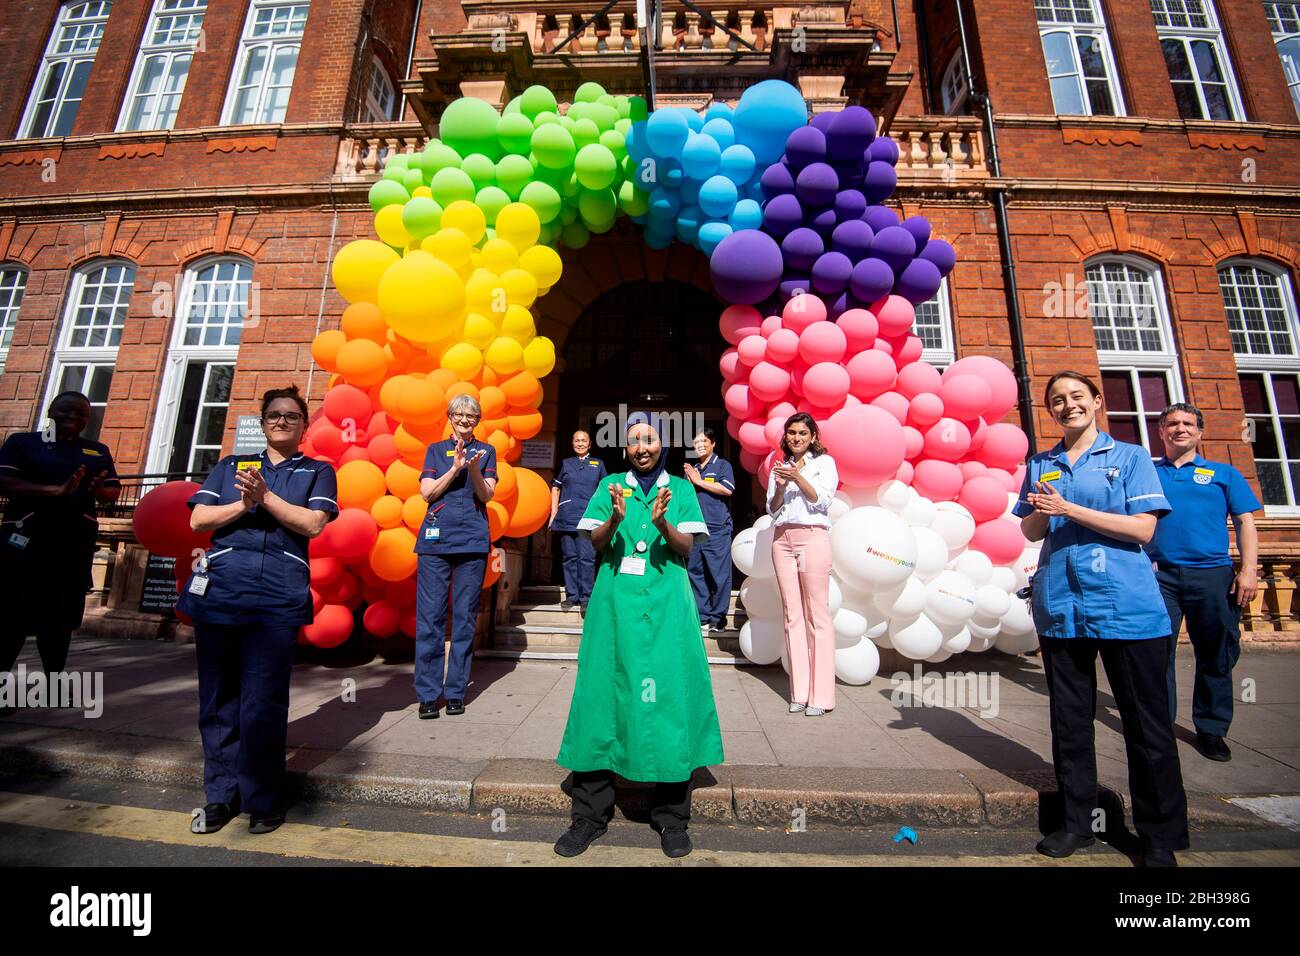 NHS nurses, surgeons, doctors and support staff help to unveil a rainbow balloon display outside the National Hospital for Neurology and Neurosurgery in Holborn, London to thank the public for their support during the ongoing Coronavirus pandemic. Stock Photo